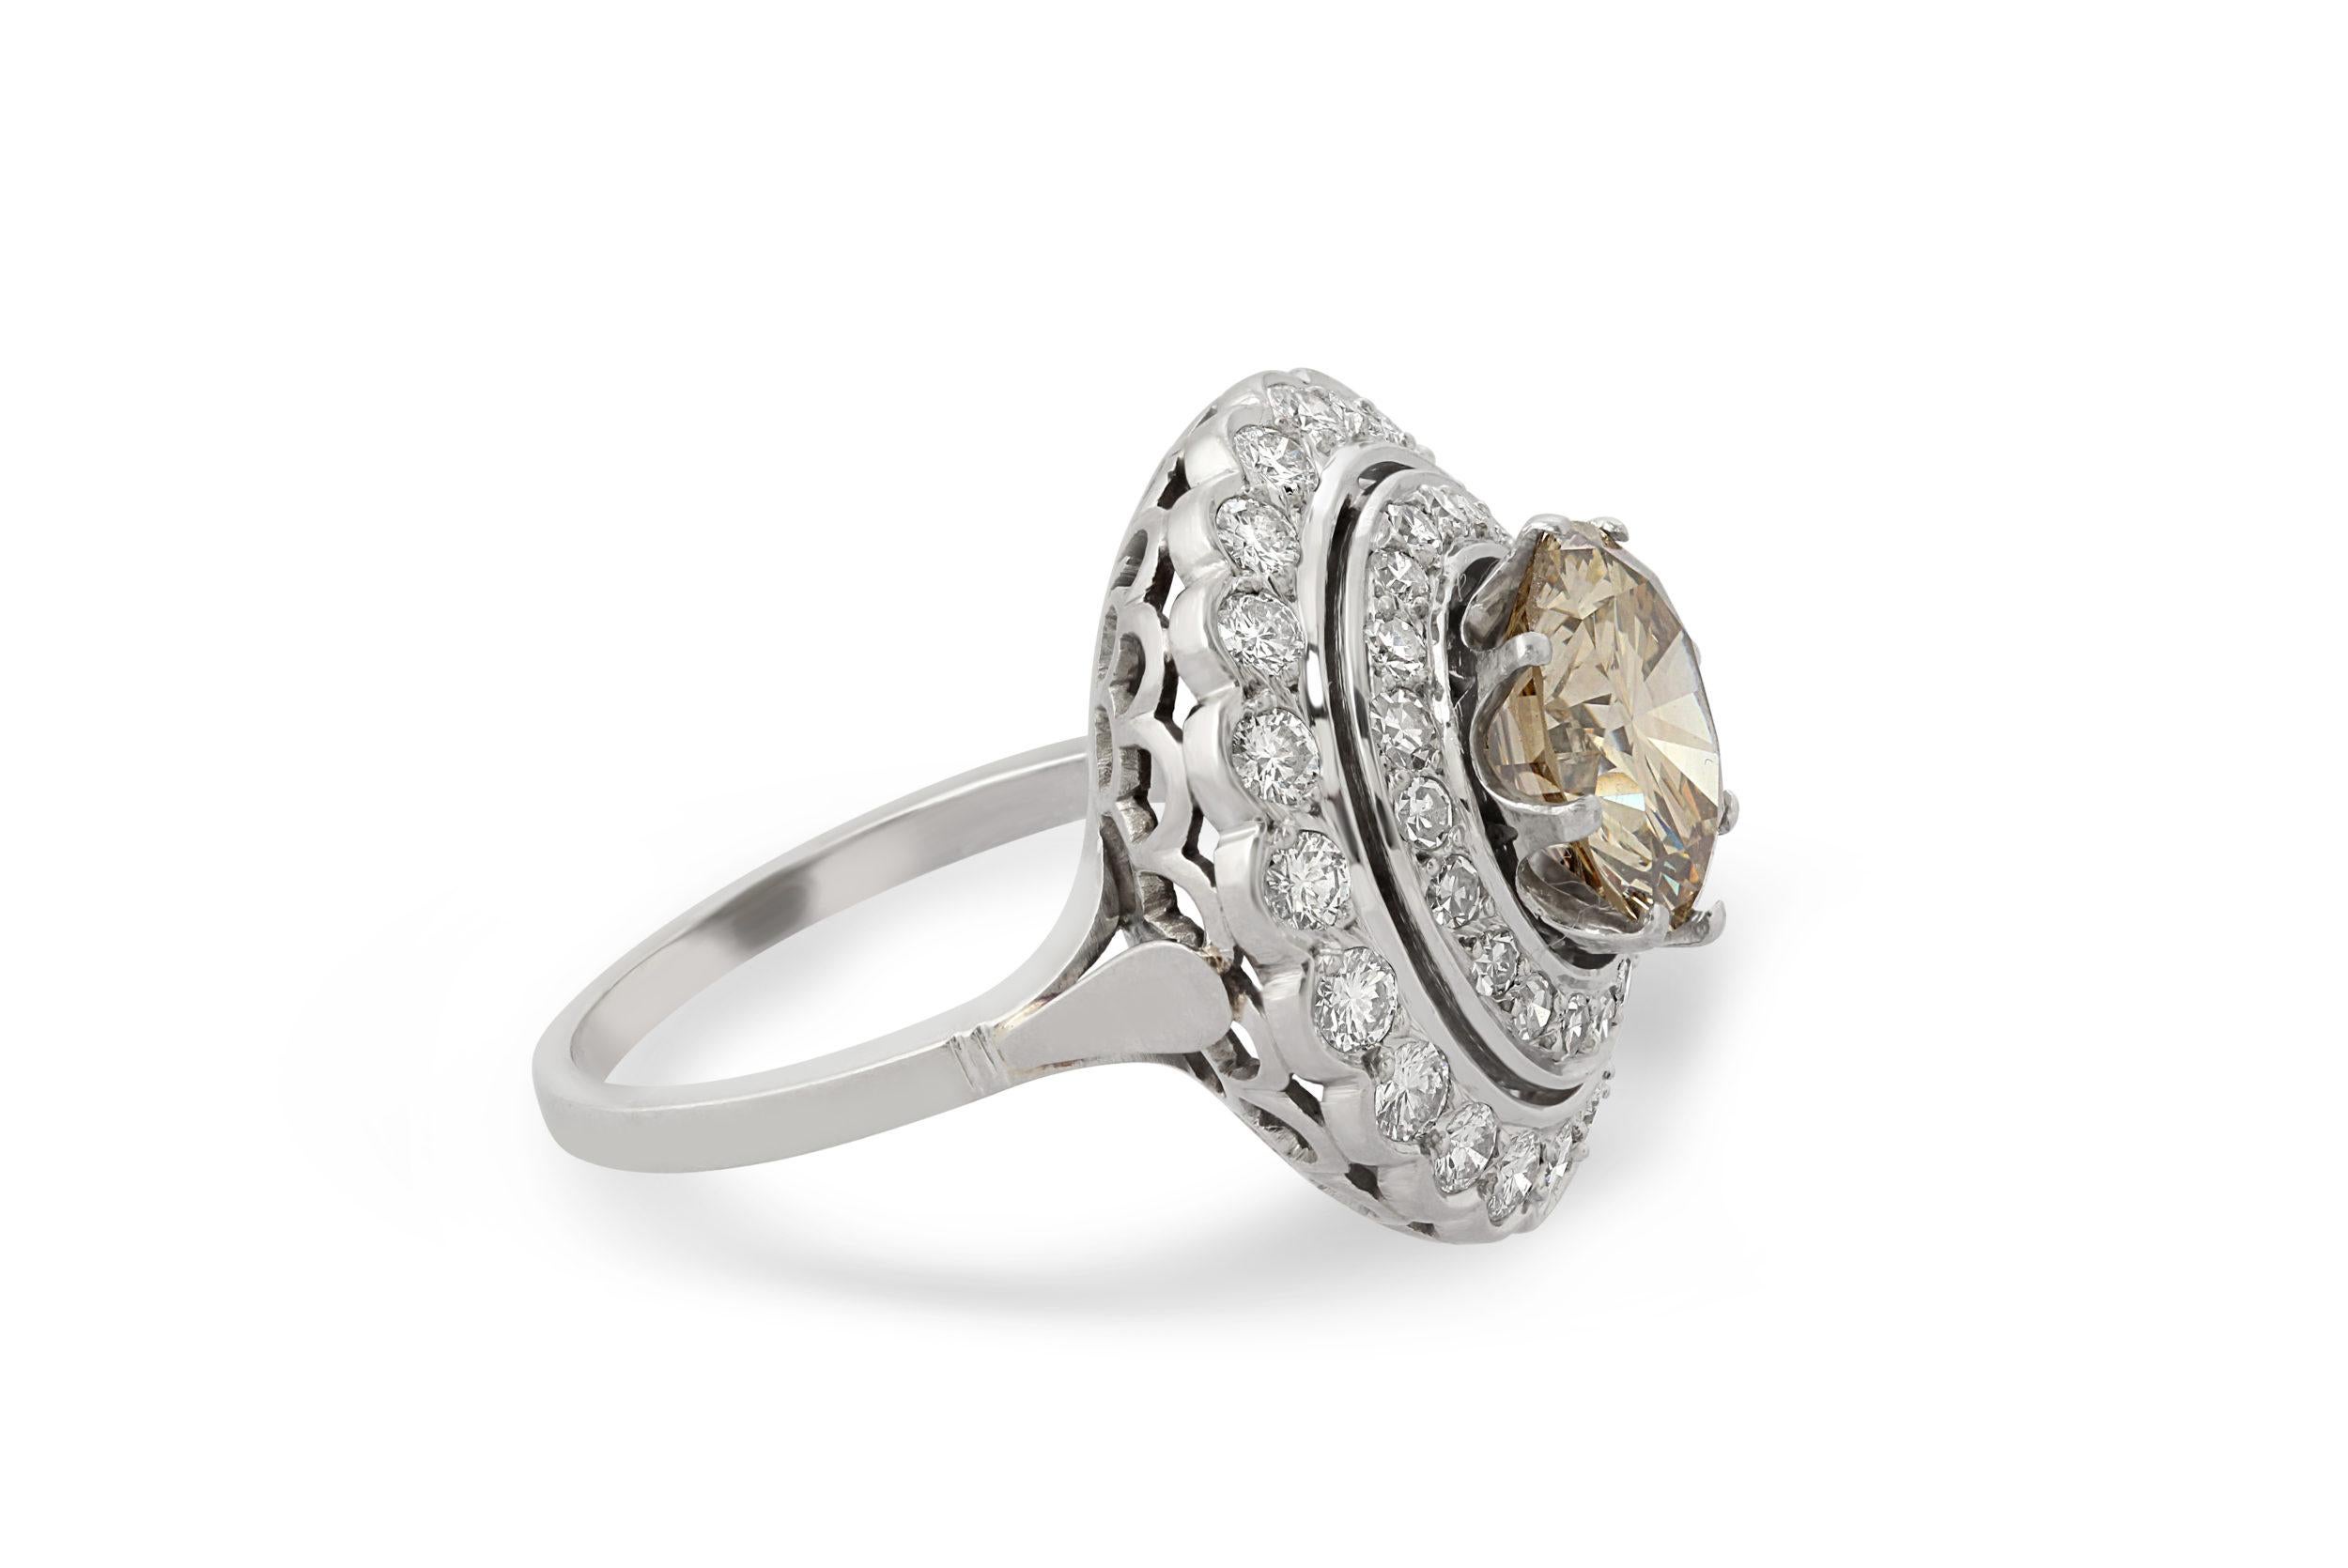 A French platinum and diamond ring, set at the centre with a 3.70 carat fancy brown-yellow diamond.